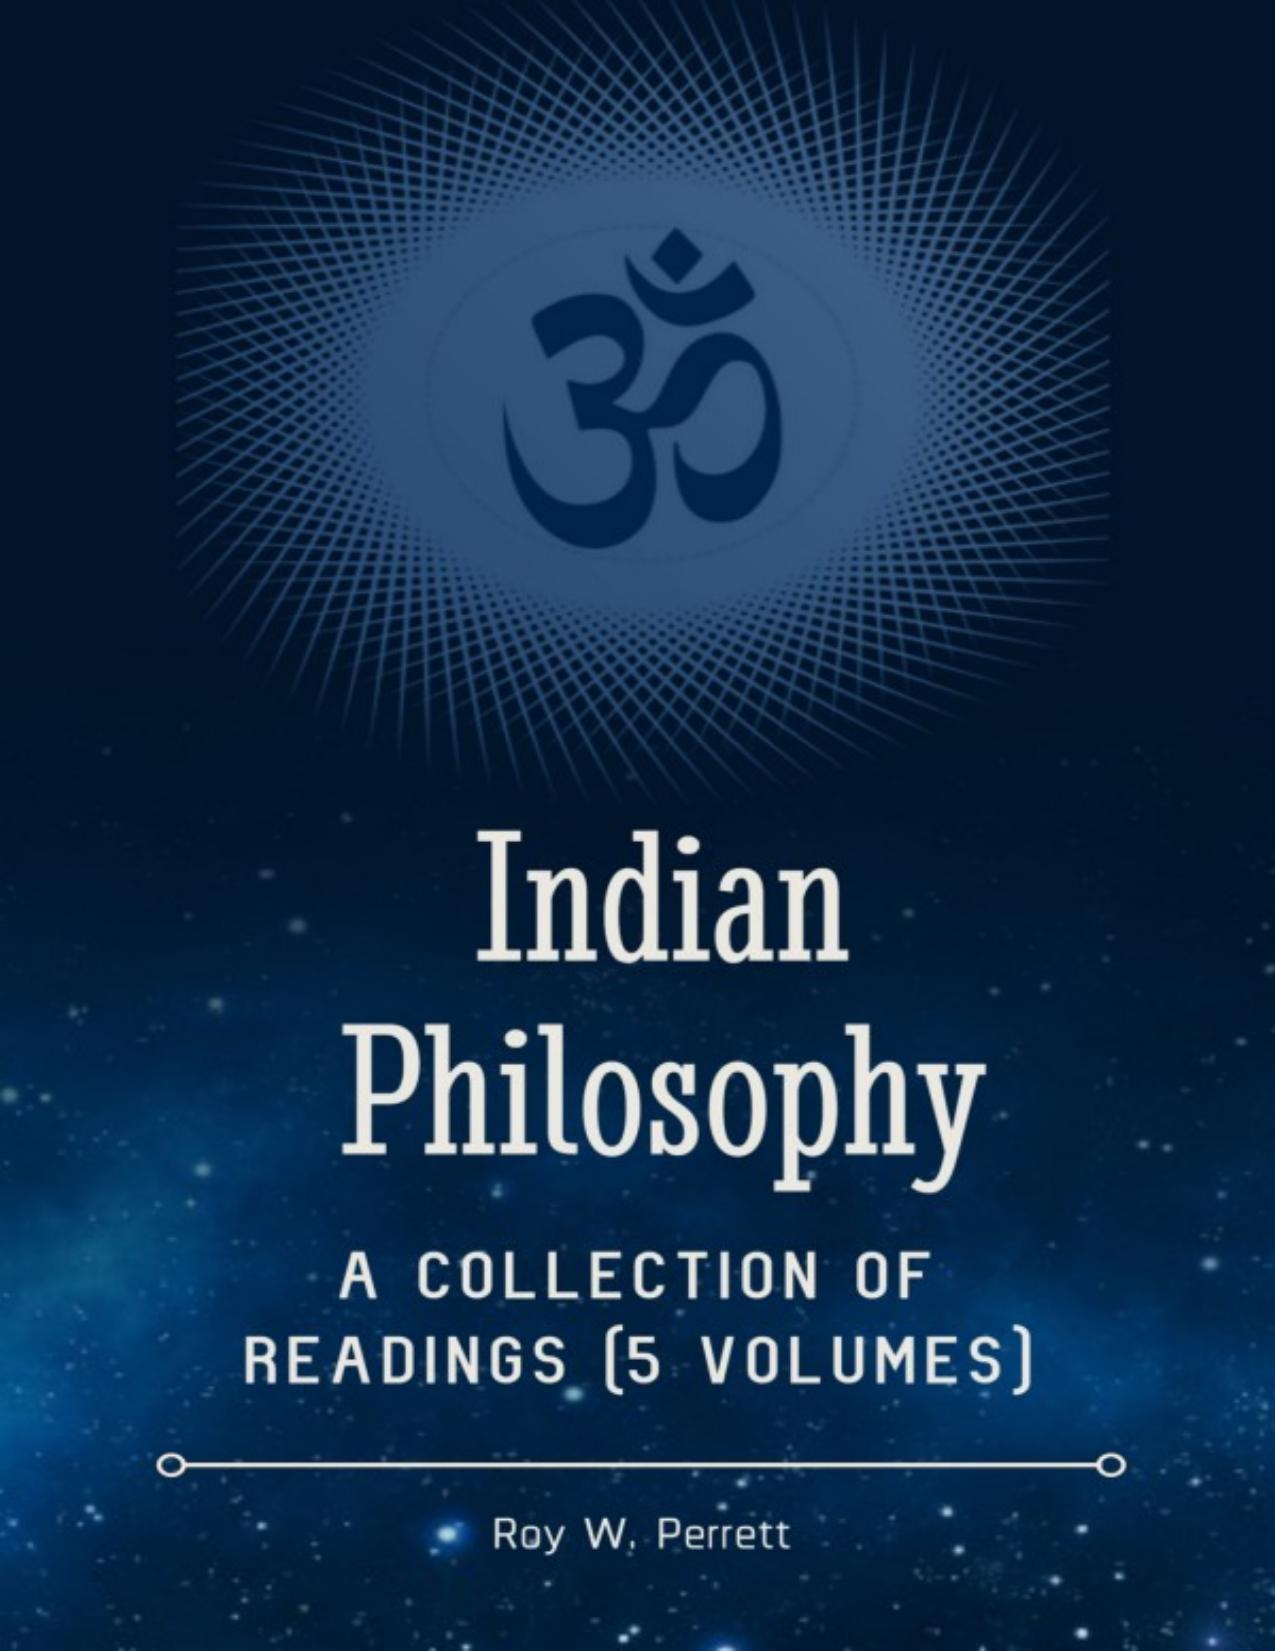 Indian Philosophy: A Collection of Readings (5 Volumes)